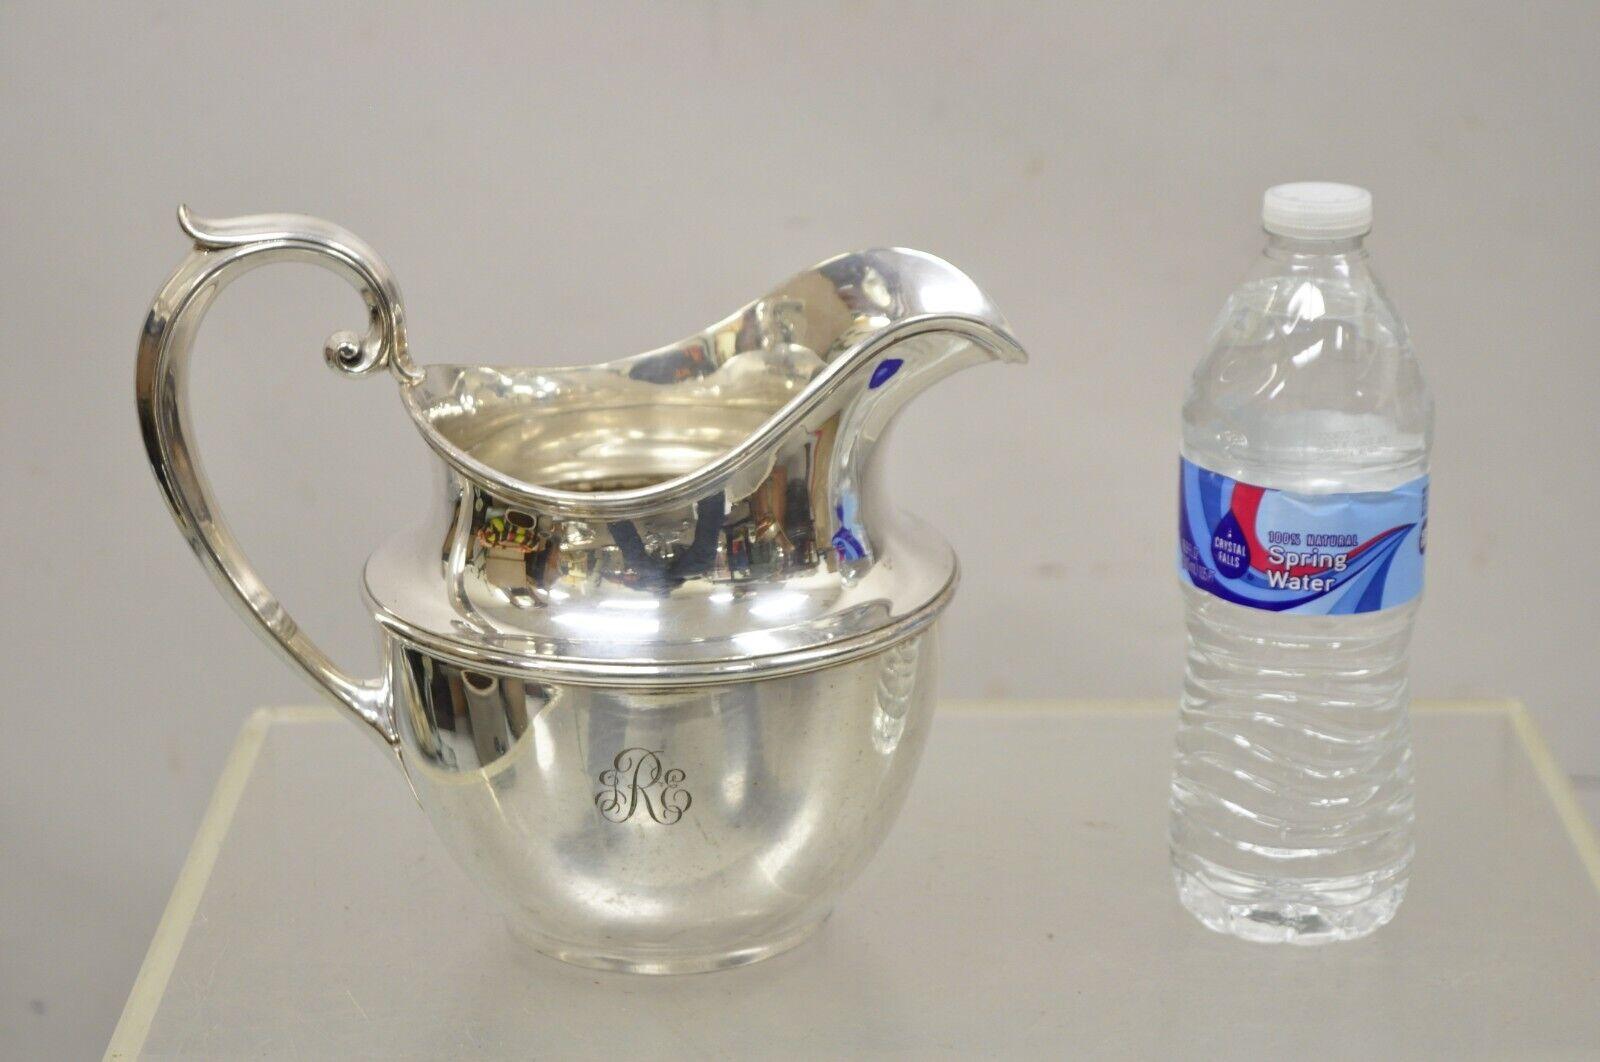 Antique Gm Co. Silver Plated Victorian Water Pitcher with Monogram For Sale 3